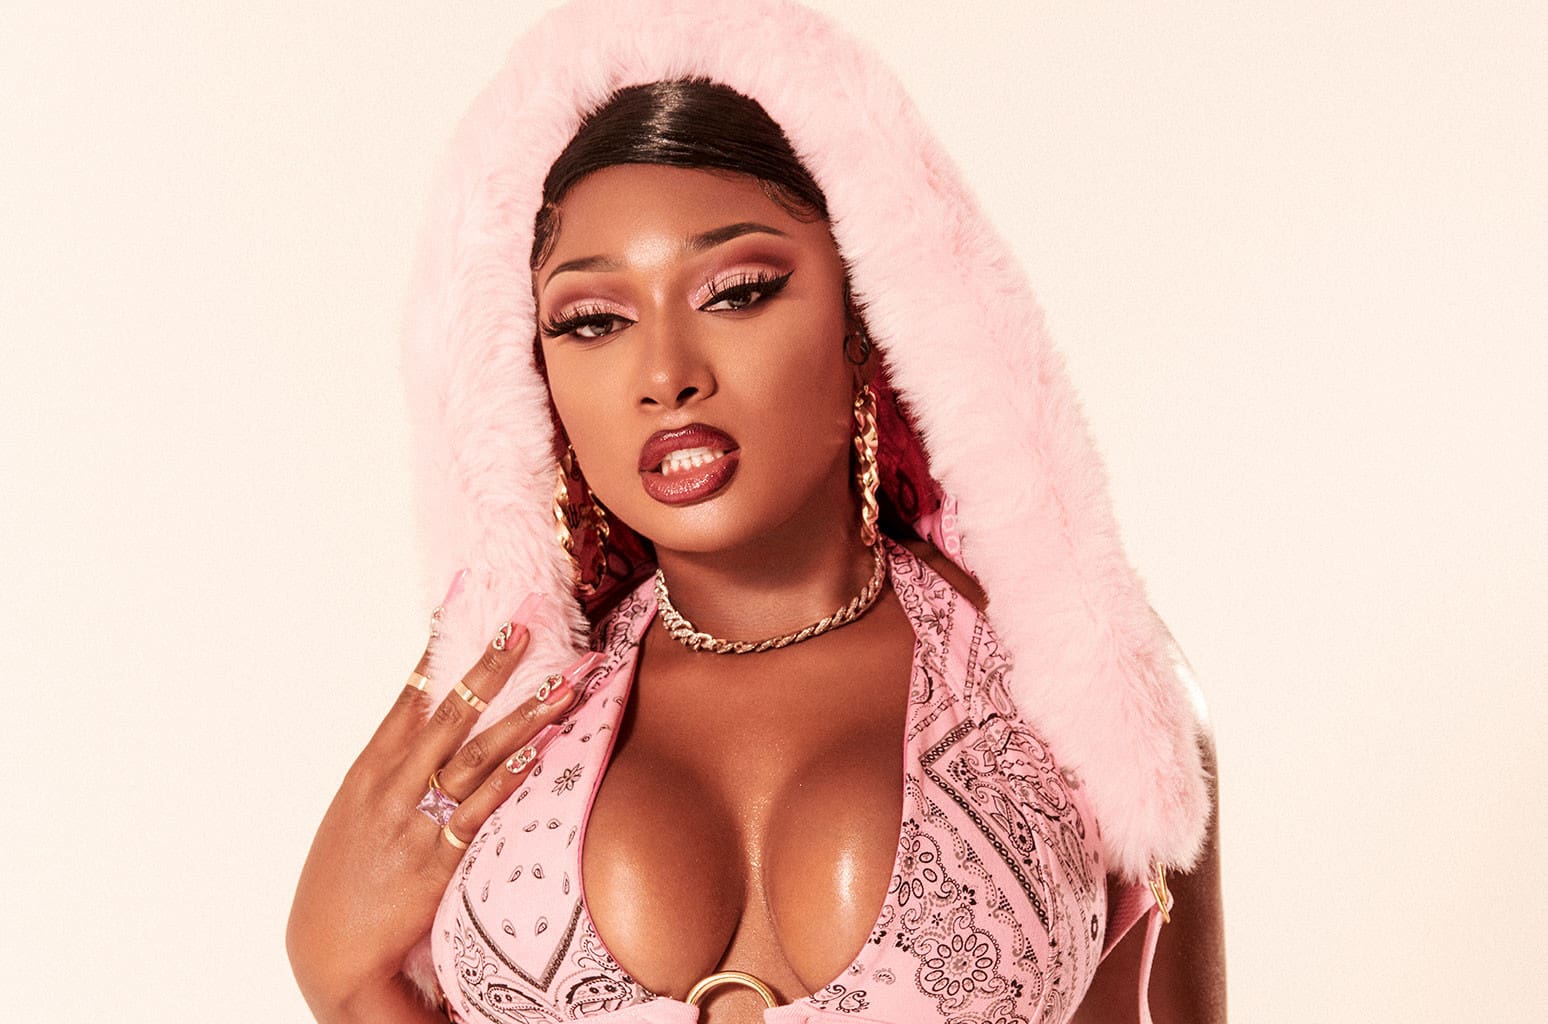 Megan Thee Stallion Claps Back At A Hater - Check Out Her Message